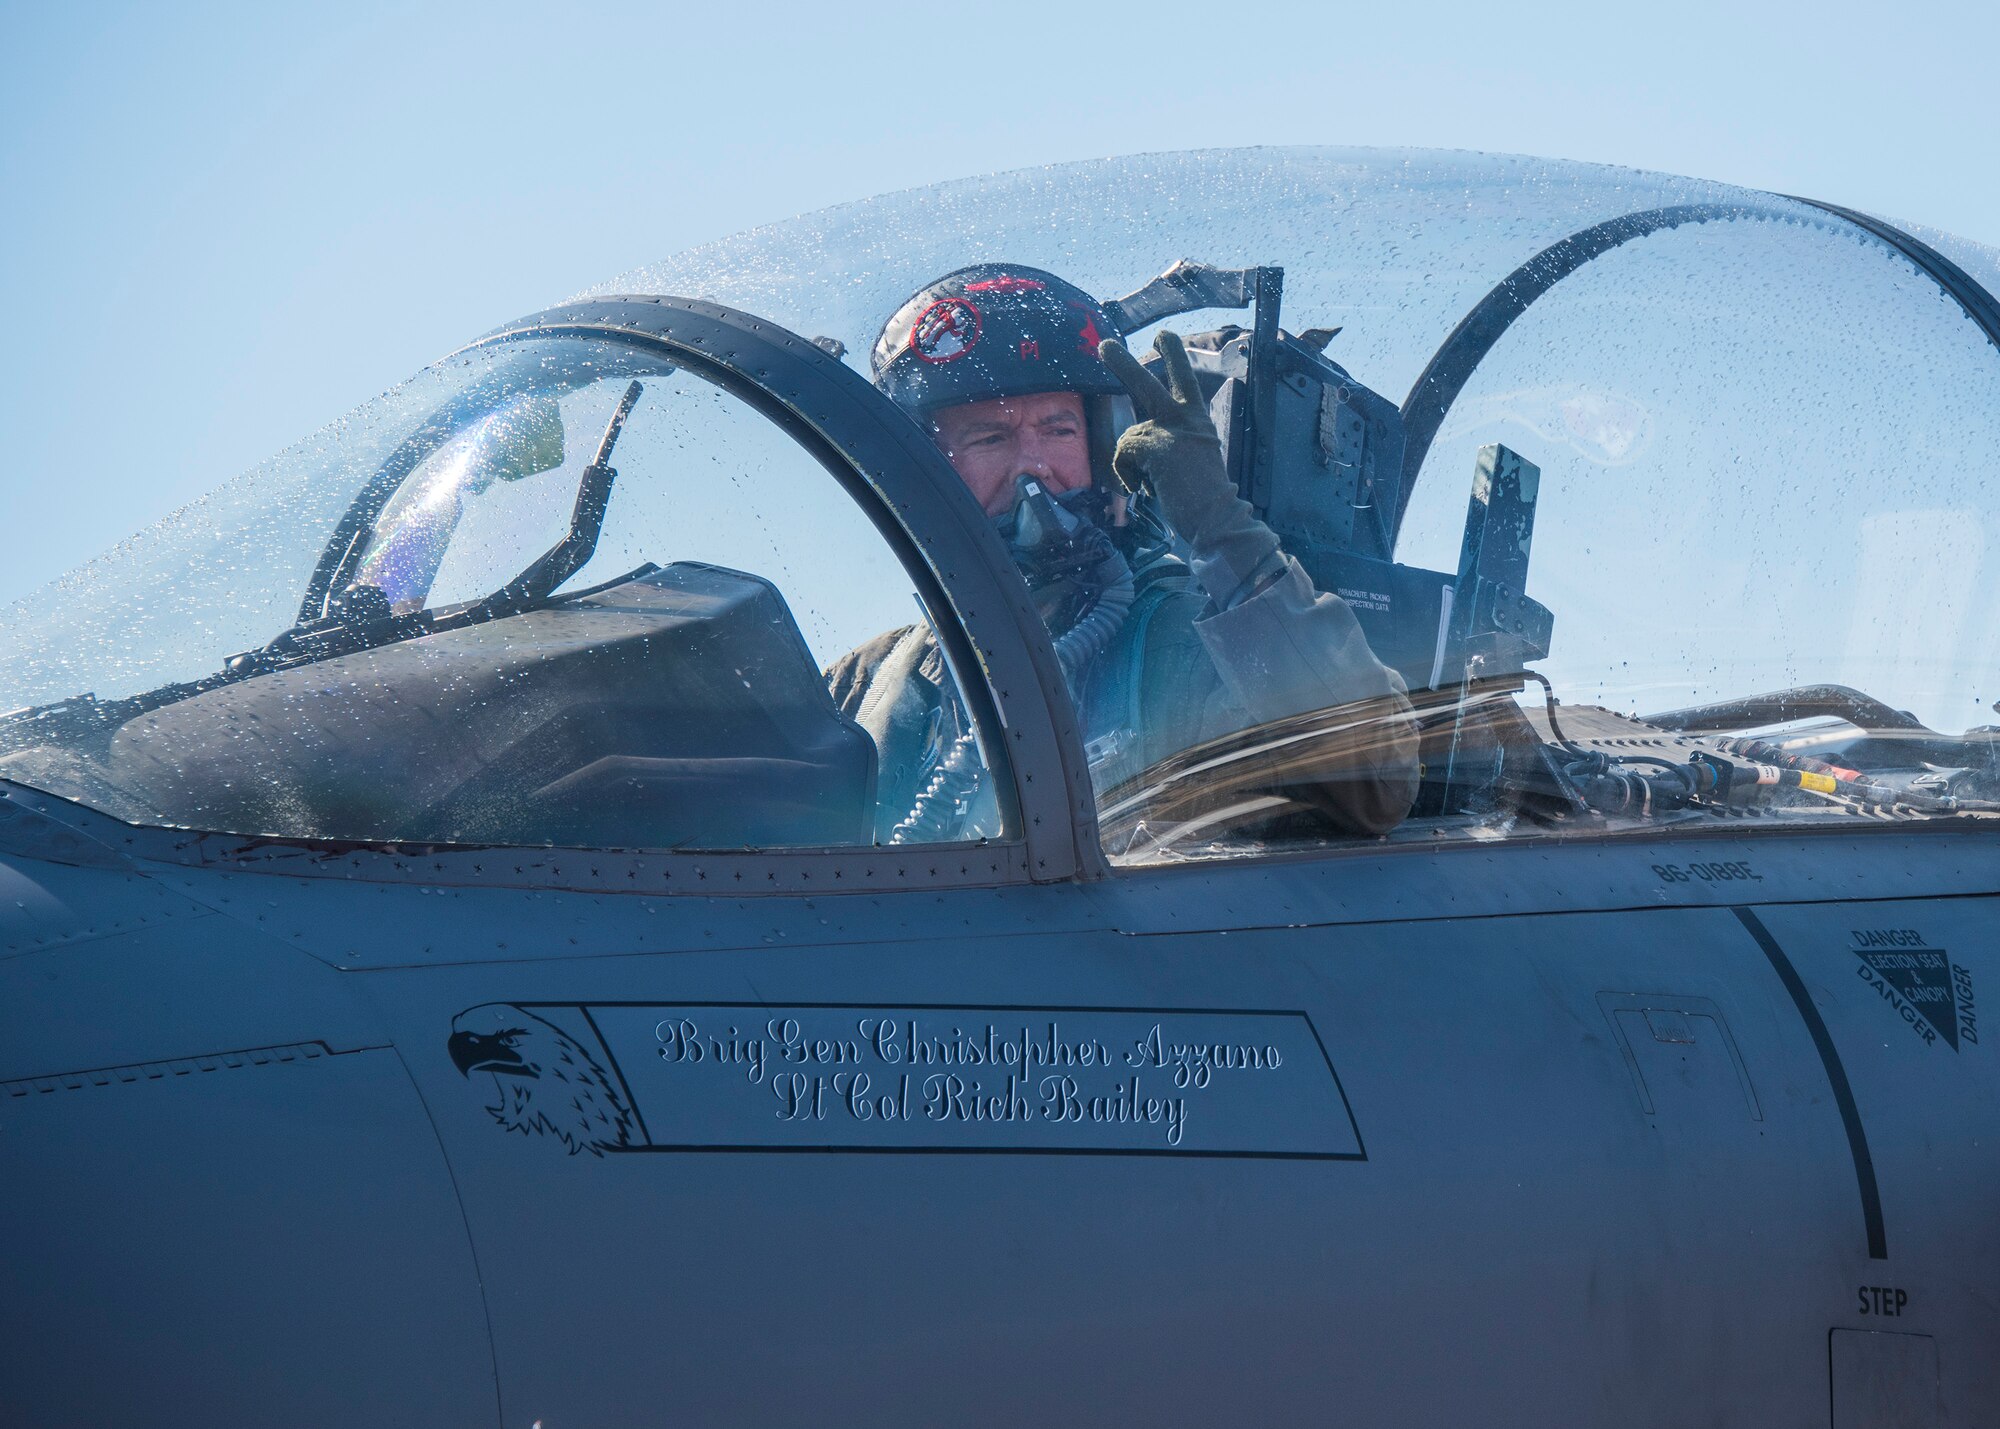 Brig. Gen. Christopher Azzano, 96thTest Wing commander, signals aircraft maintainers during his fini flight at Eglin Air Force Base, Fla. May 15. The fini flight is a symbol of a member’s final flight with the unit or base. Azzano’s new assignment will take him to Wright-Patterson Air Force Base in Ohio to take command of the Directorate of Air, Space and Cyberspace Operations. (U.S. Air Force photo/Ilka Cole)